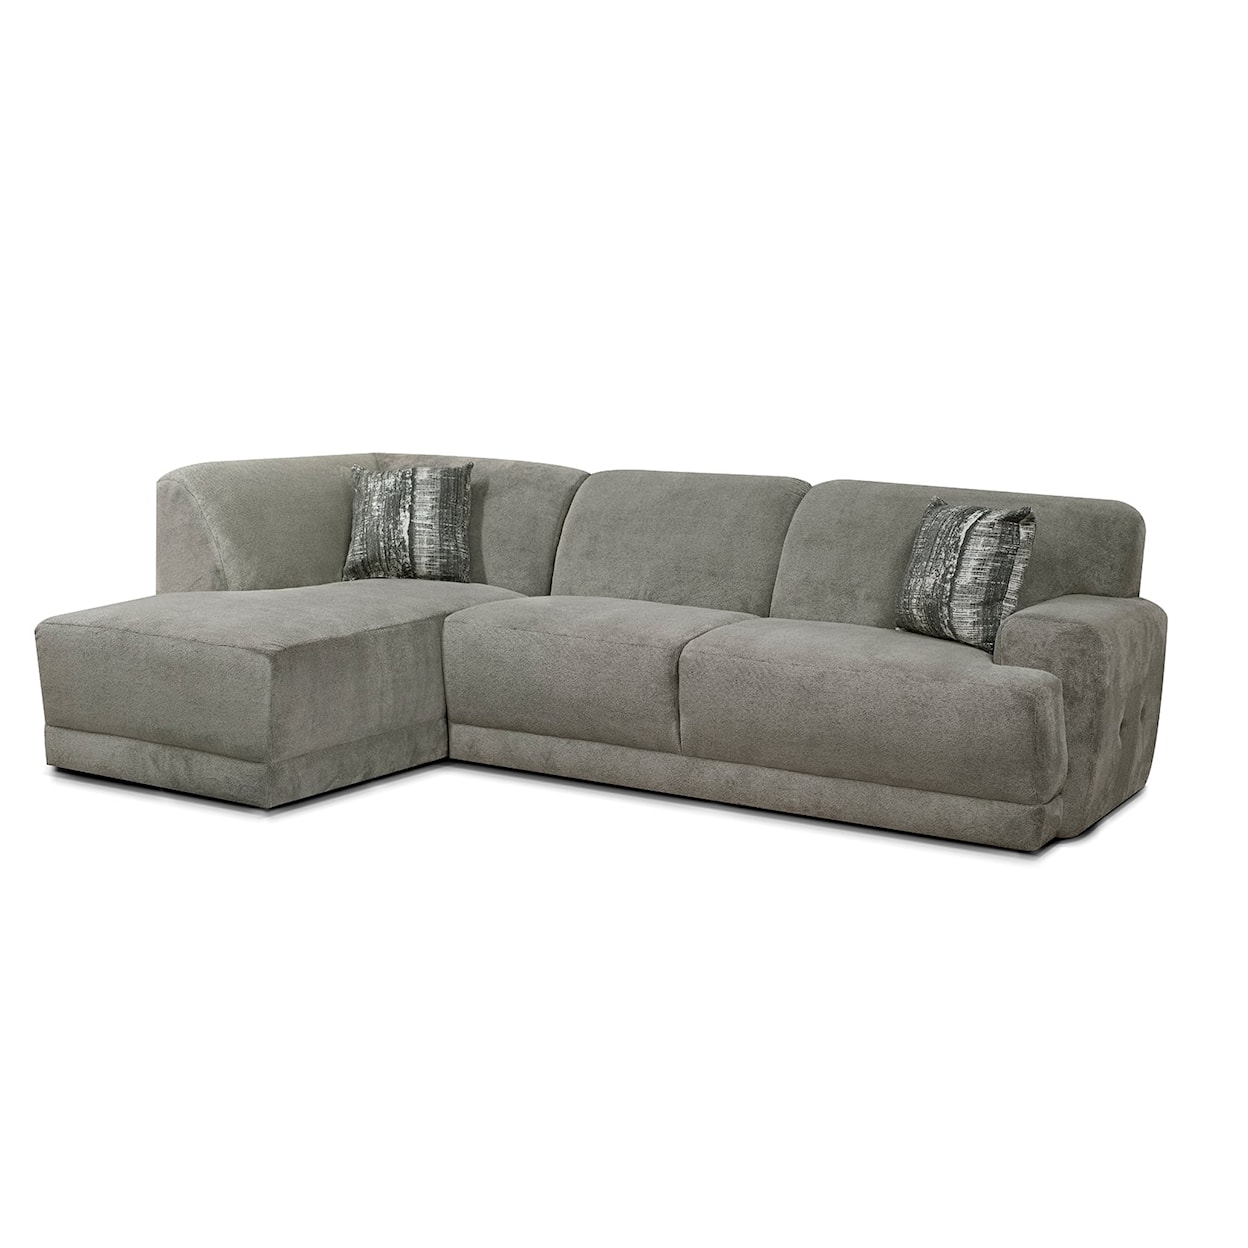 England 2880 Series Sectional Sofa with Left Facing Chaise